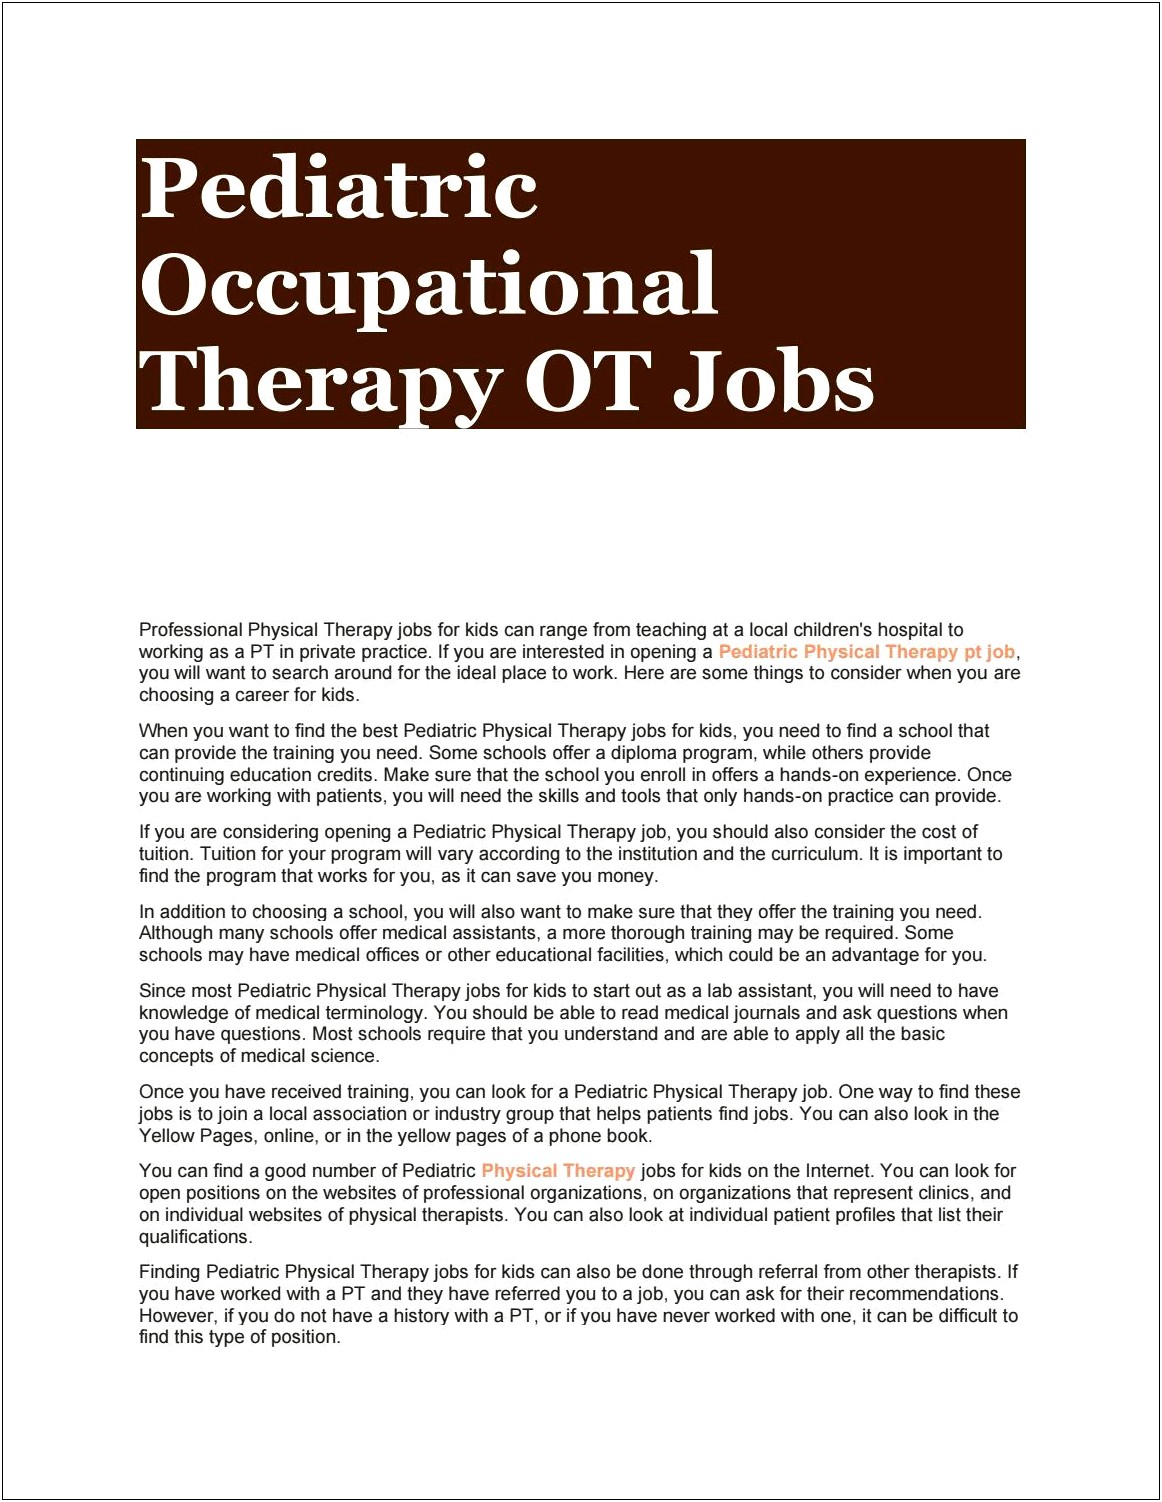 Pediatric Physical Therapist Objective Resume